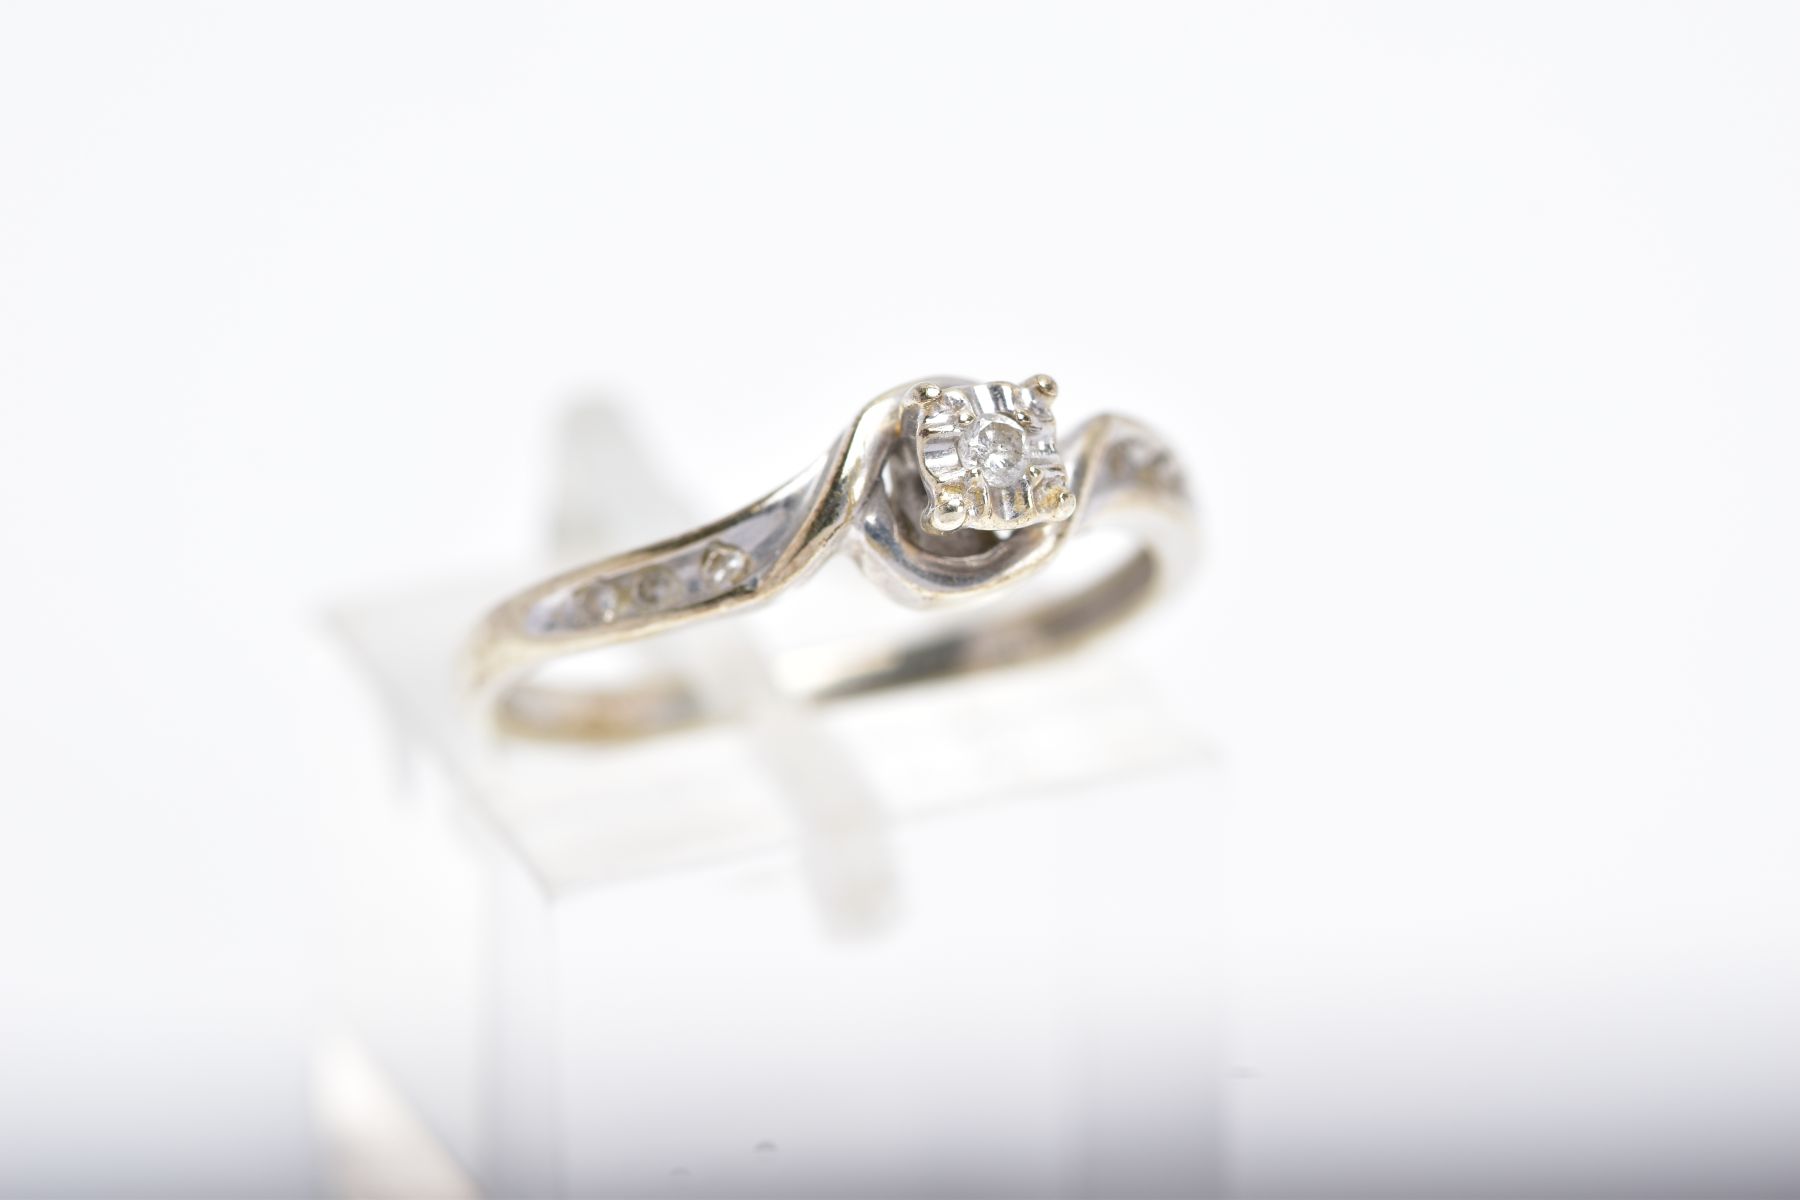 A 9CT DIAMOND RING, designed with a central round brilliant cut diamond within a square surround, - Image 4 of 4